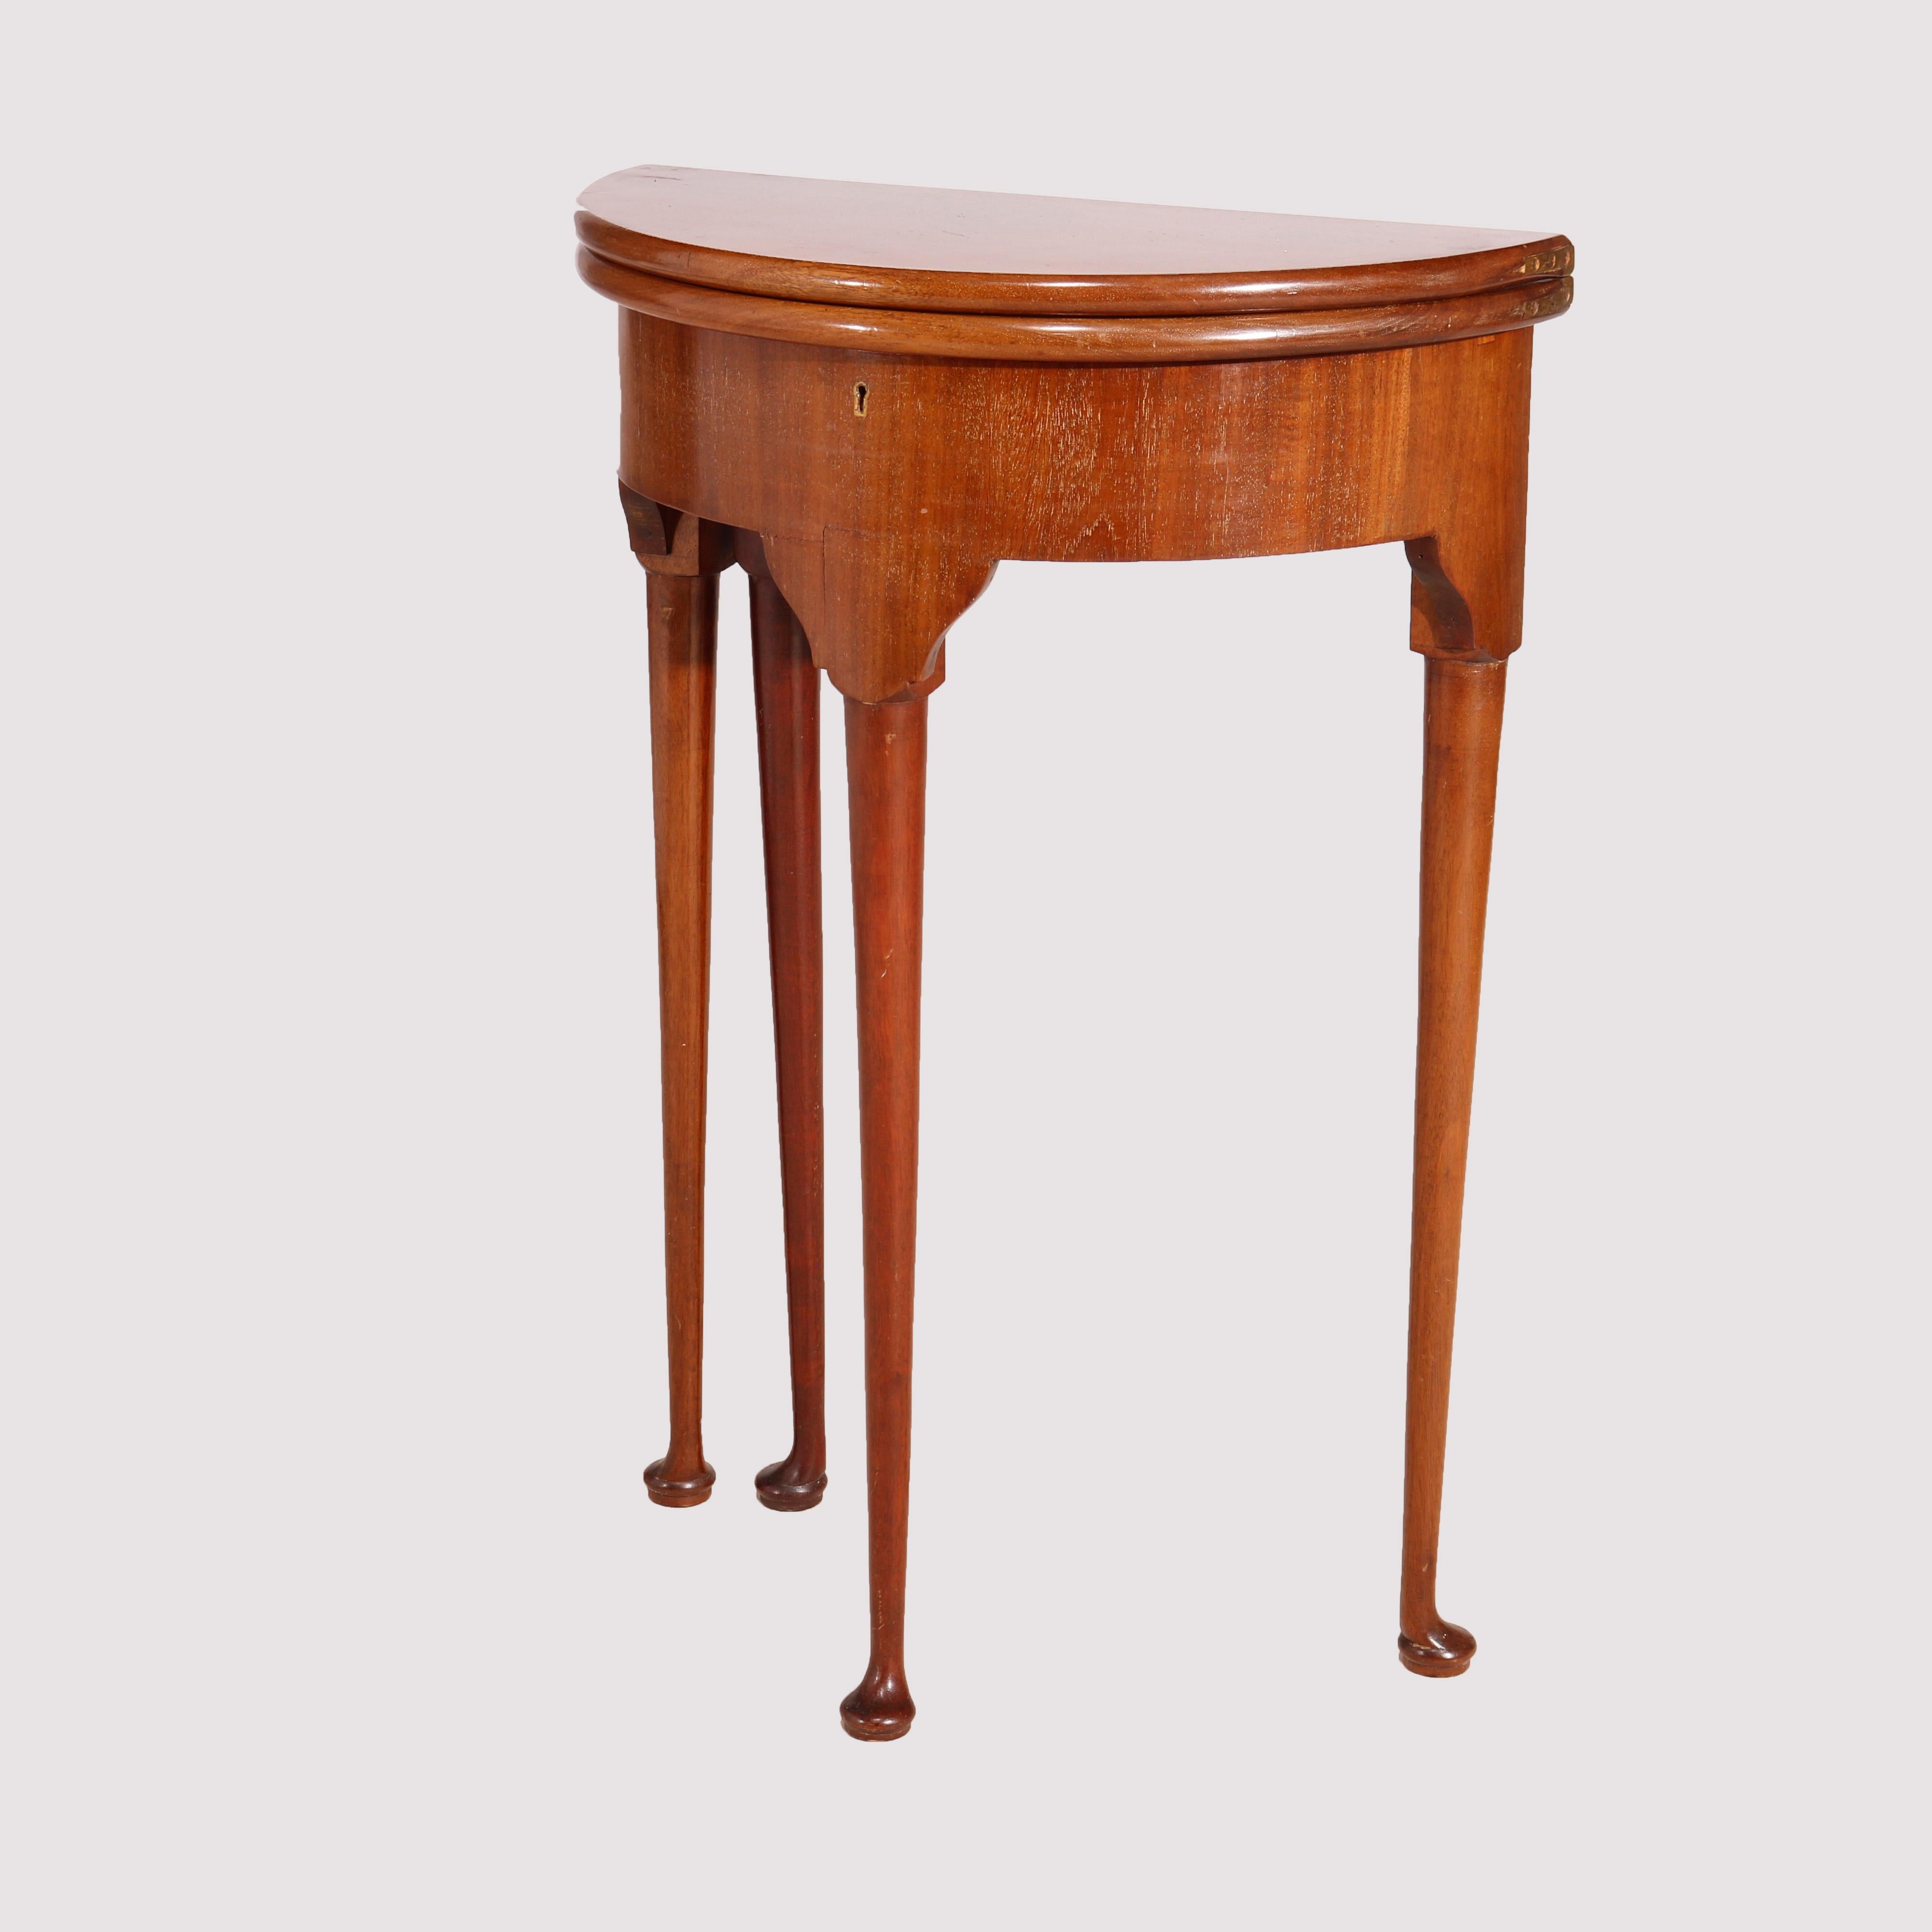 English Queen Anne Mahogany Demilune Lift Top Table, 20th Century For Sale 4